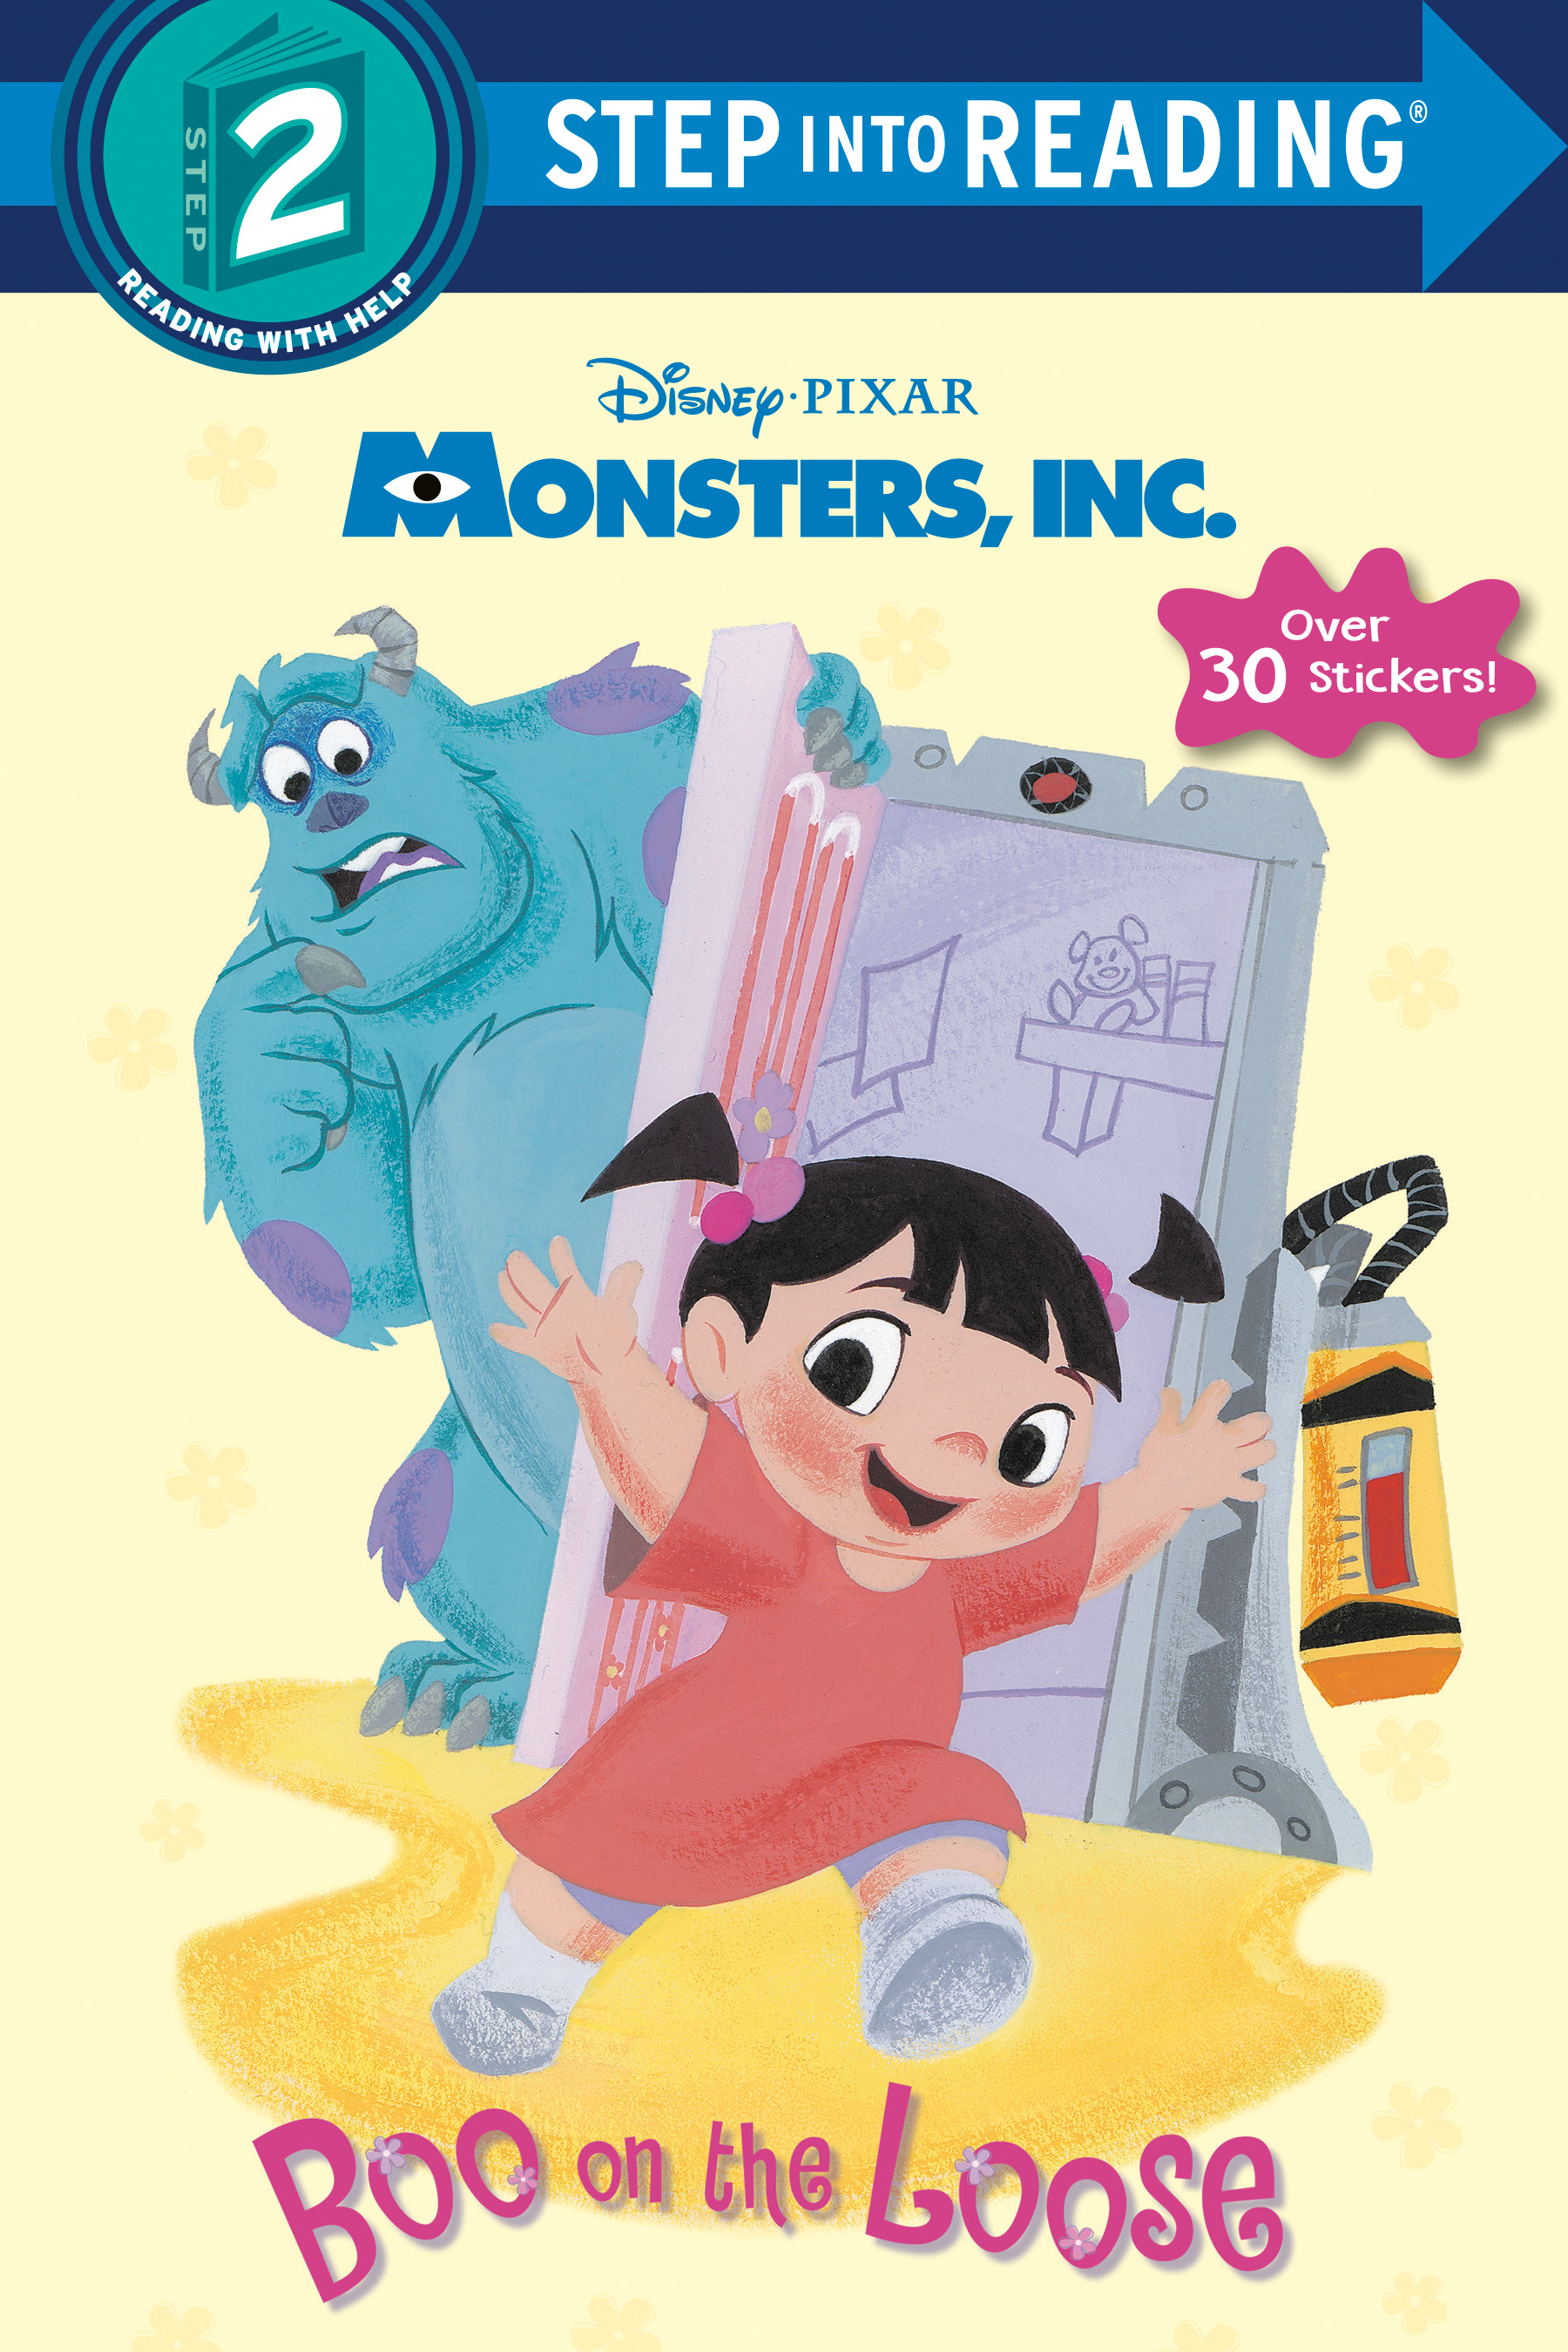 Step Into Reading - Boo on the Loose (Disney/Pixar Monsters, Inc.) | Herman, Gail